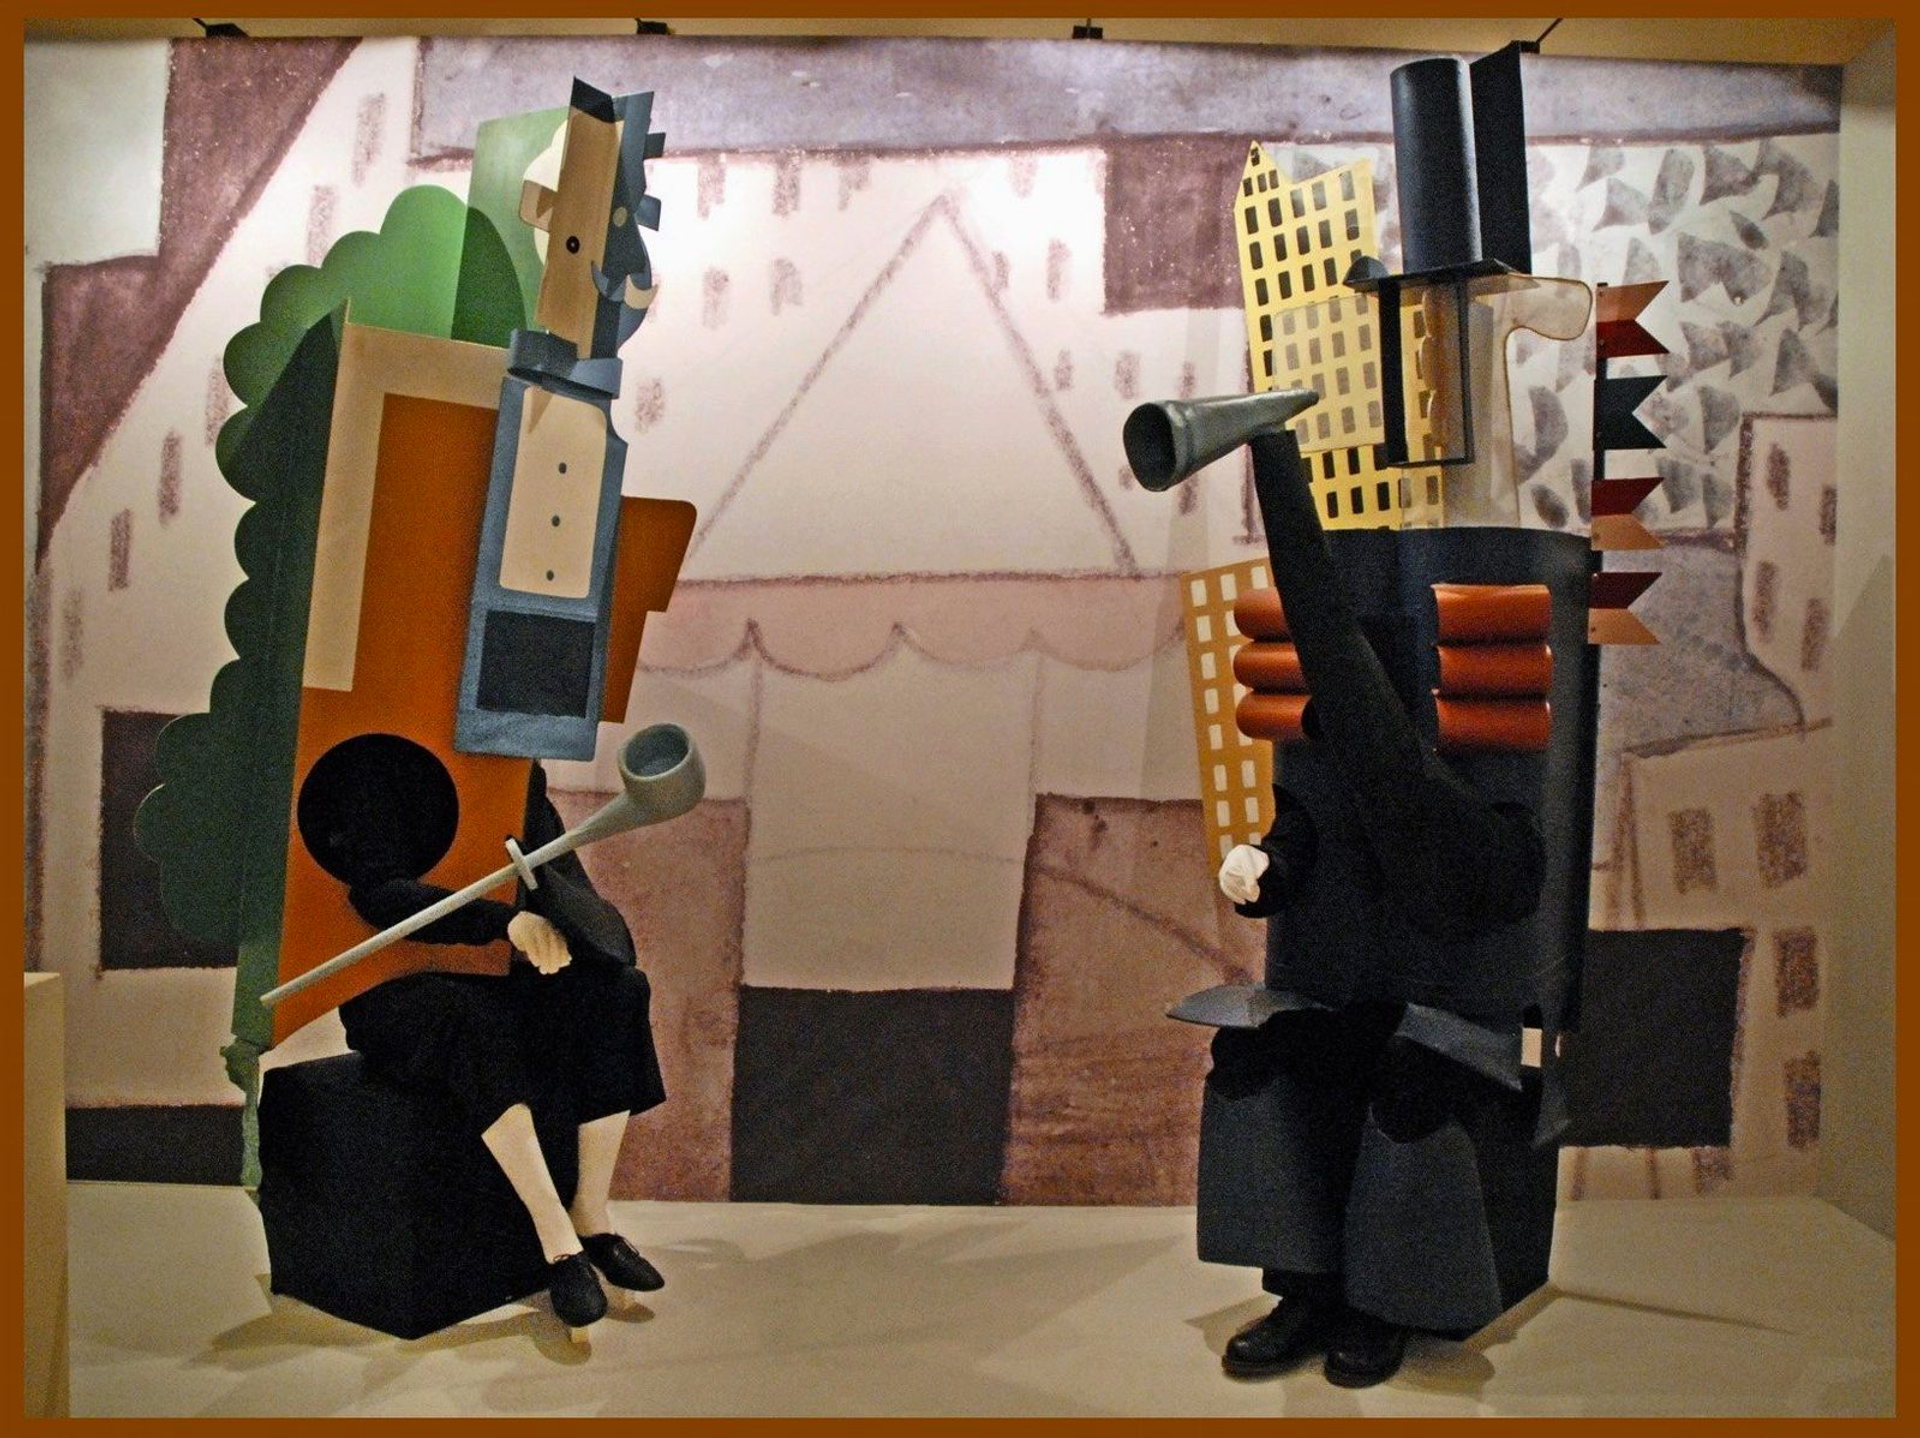 Two sets of cubist costumes designed by Pablo Picasso for the Parade ballet.